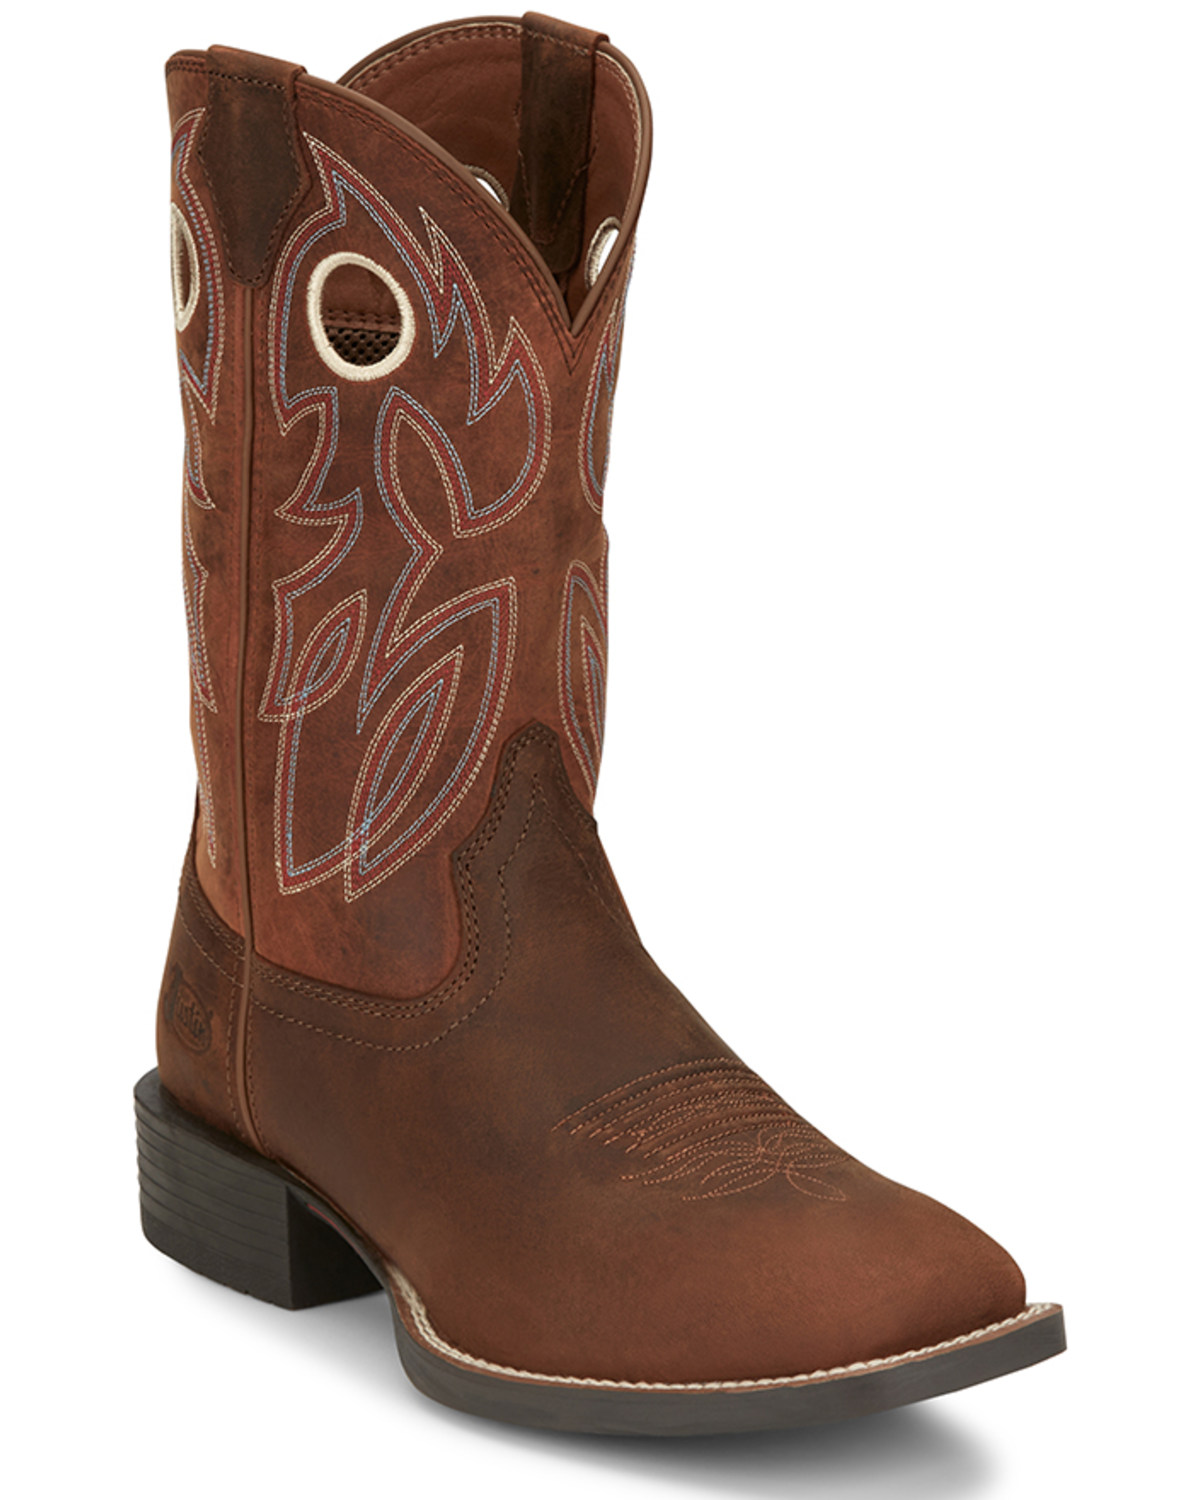 Justin Men's Bowline Western Boots - Broad Square Toe